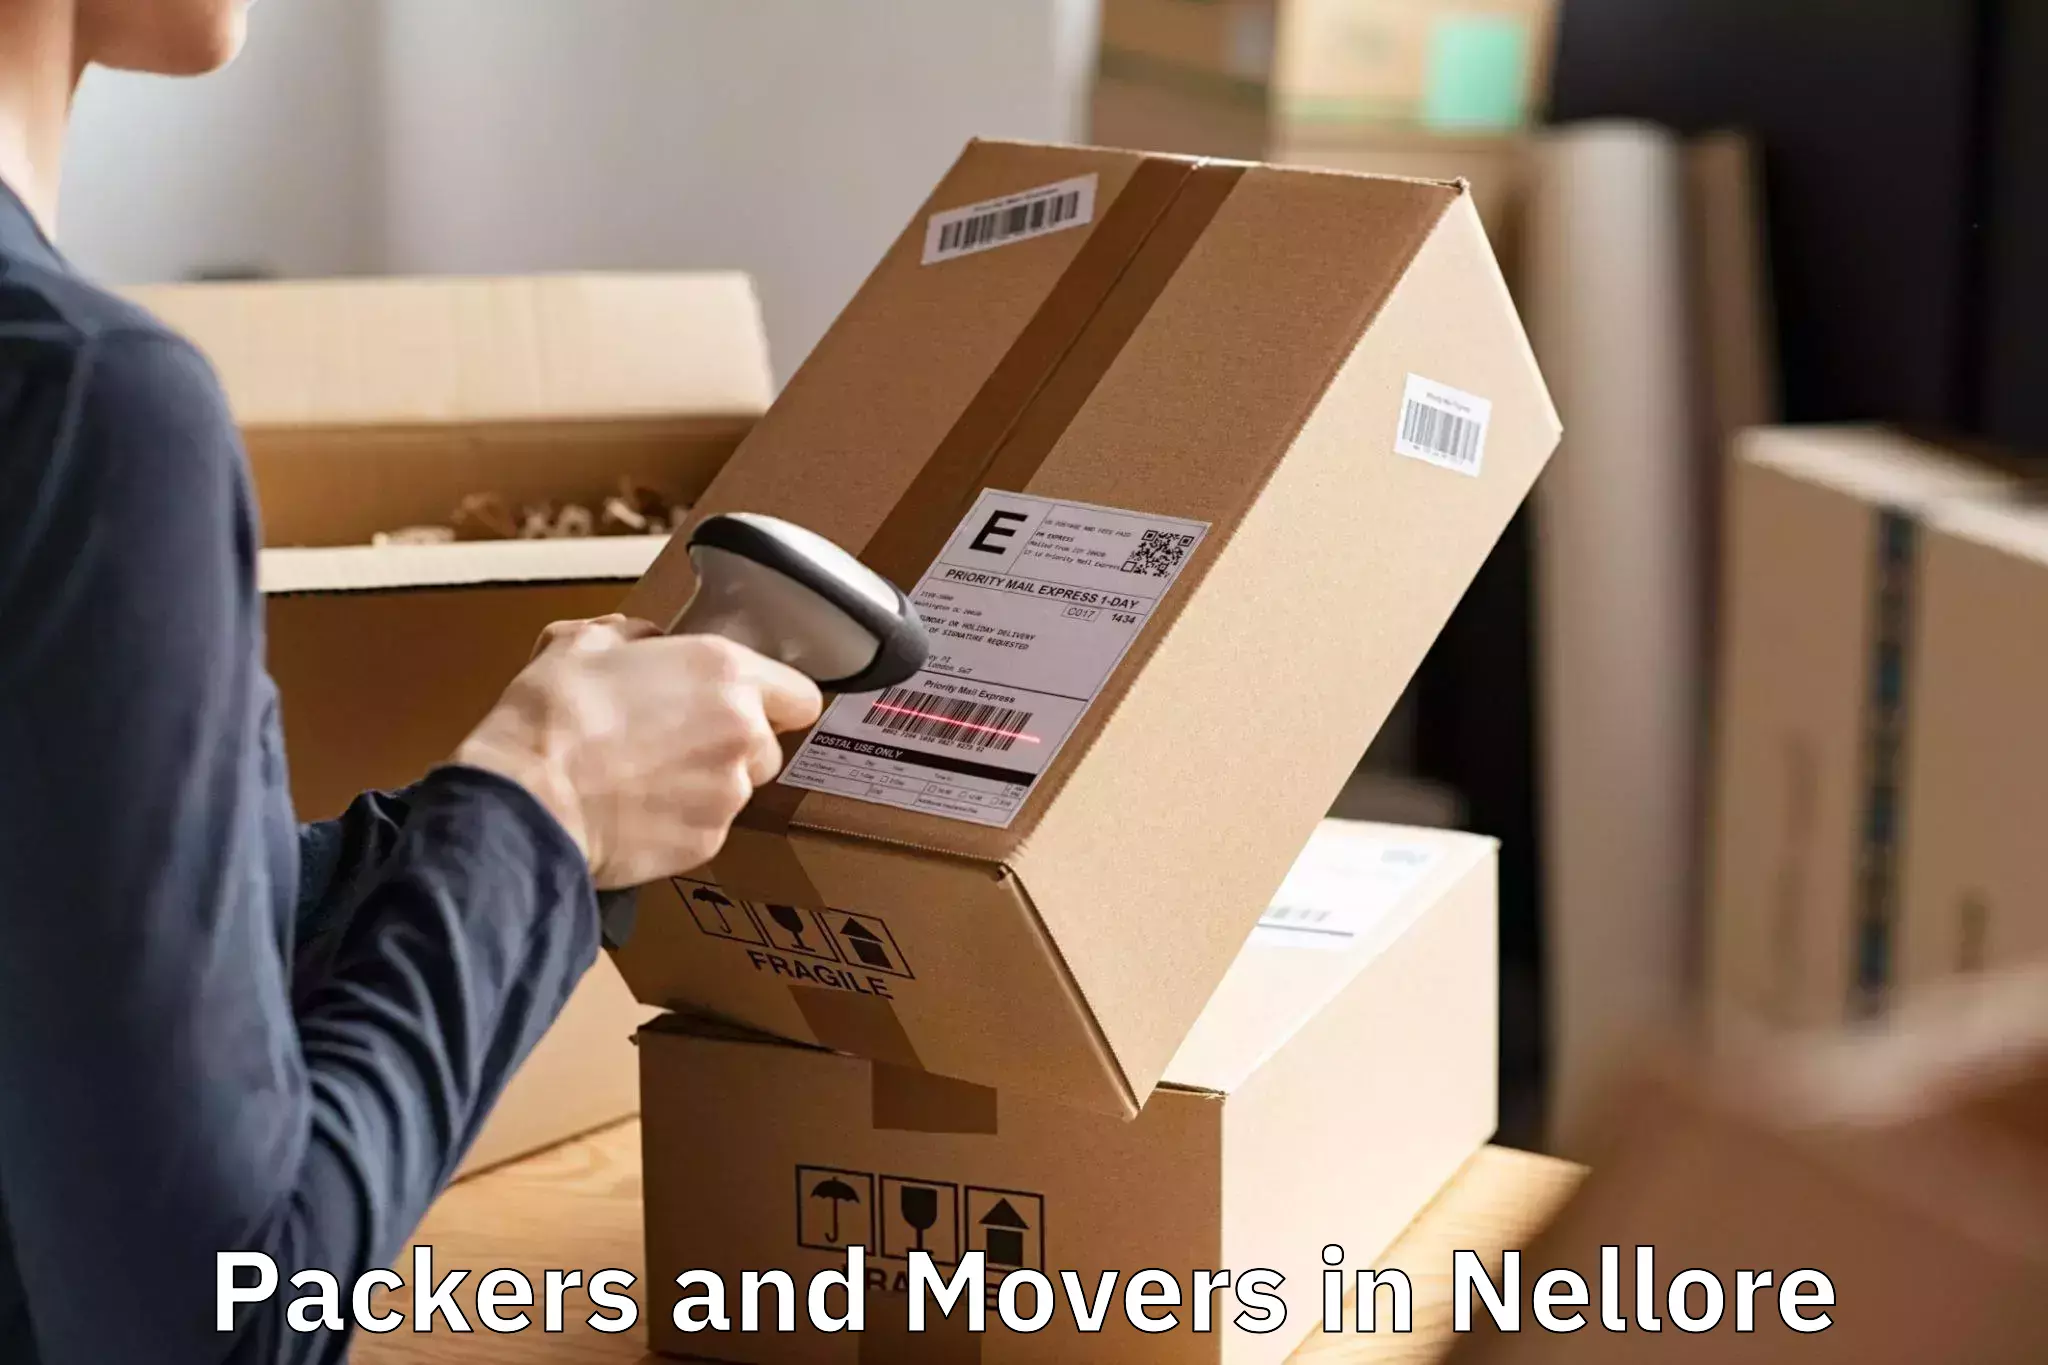 Efficient Packers And Movers in Nellore, Andhra Pradesh (AP)